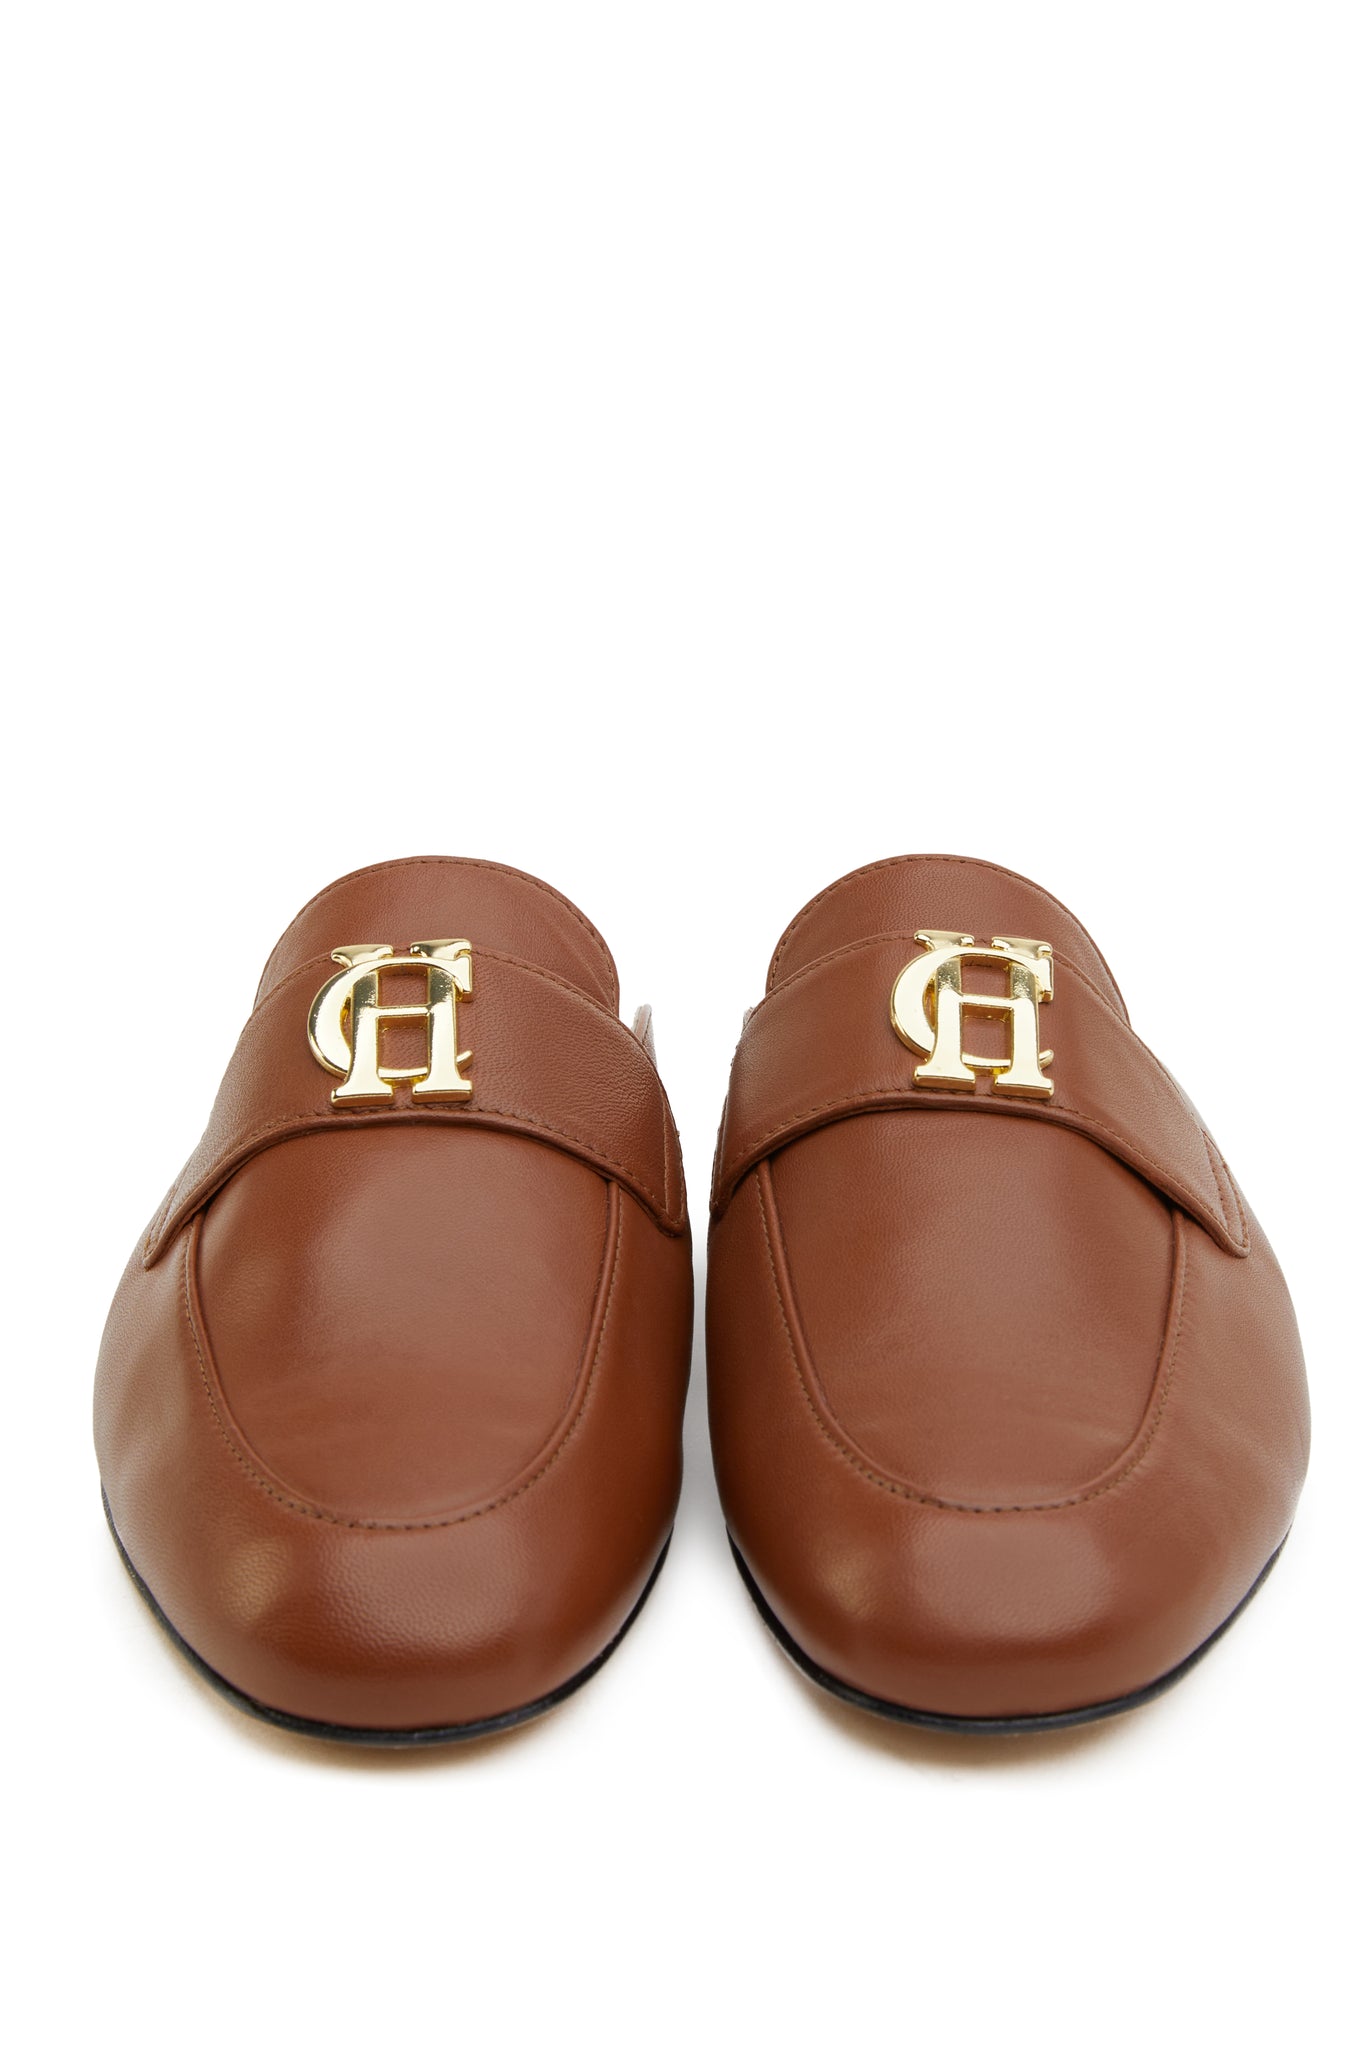 Front shot of tan leather backless loafers with a slightly pointed toe and gold hardware to the top